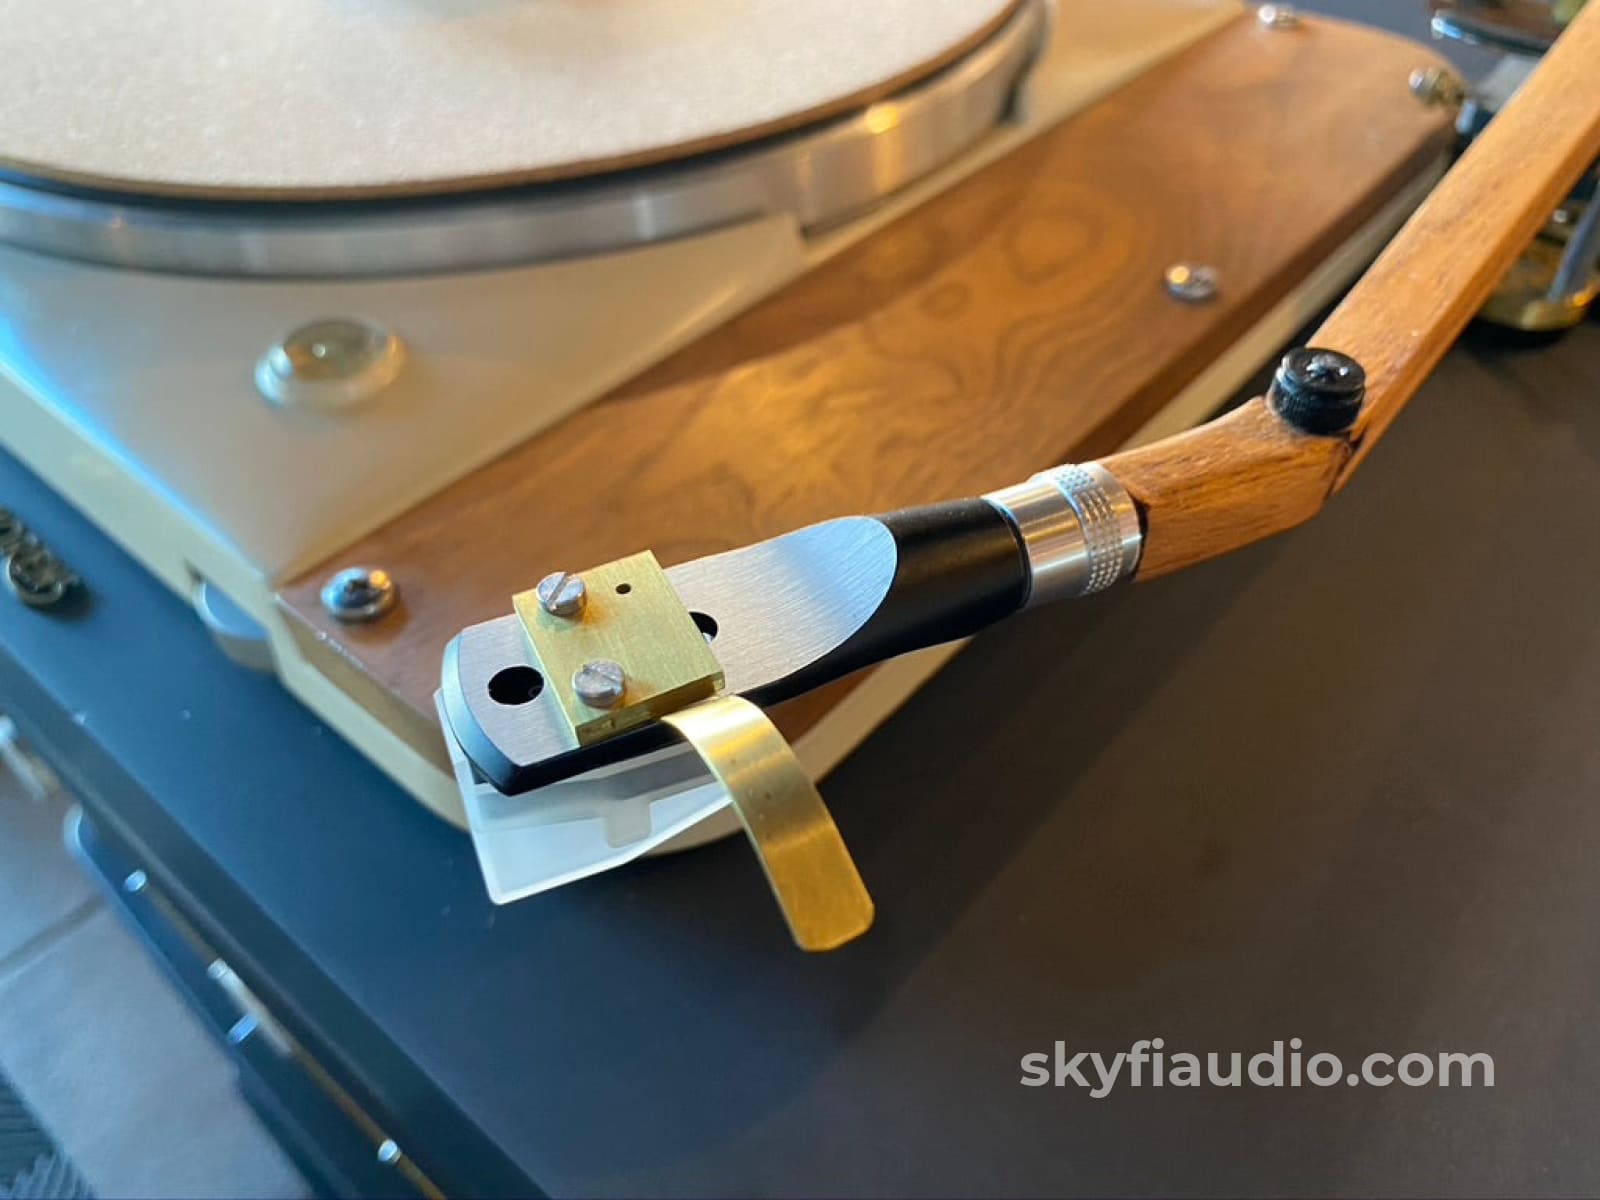 Slate Thorens Td-124 Skyfi Ultimate Build With New Sumiko Cartridge And Power Supply Turntable